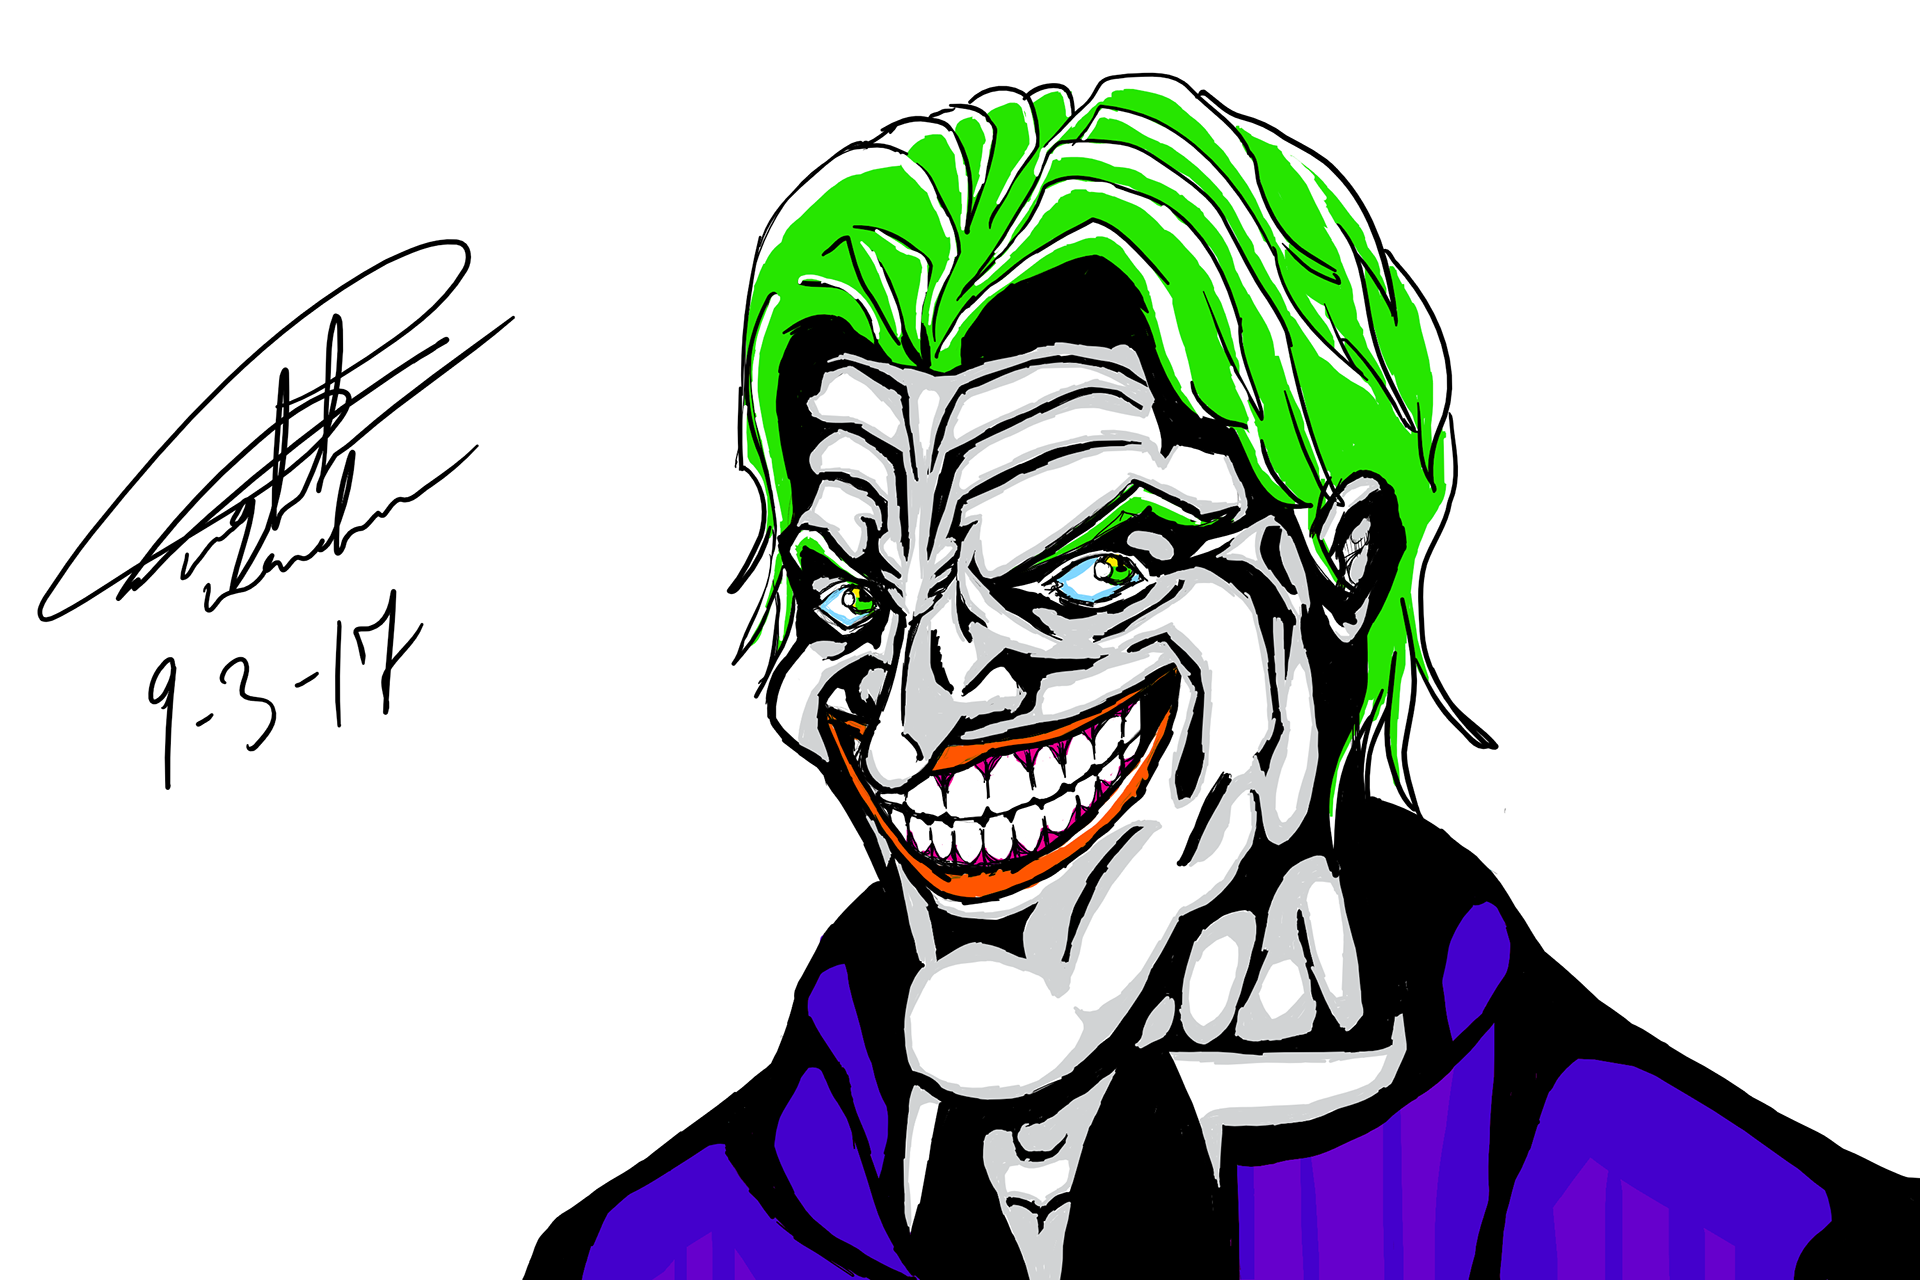 This one was a doodle turned full-scale attempt at drawing a cartoonishly evil Joker, only it turned out a tad creepier than expected. This was drawn on a Microsoft SurfaceBook, great little machine aside from the fact that it burned through three NVIDIA graphics cards in two years.